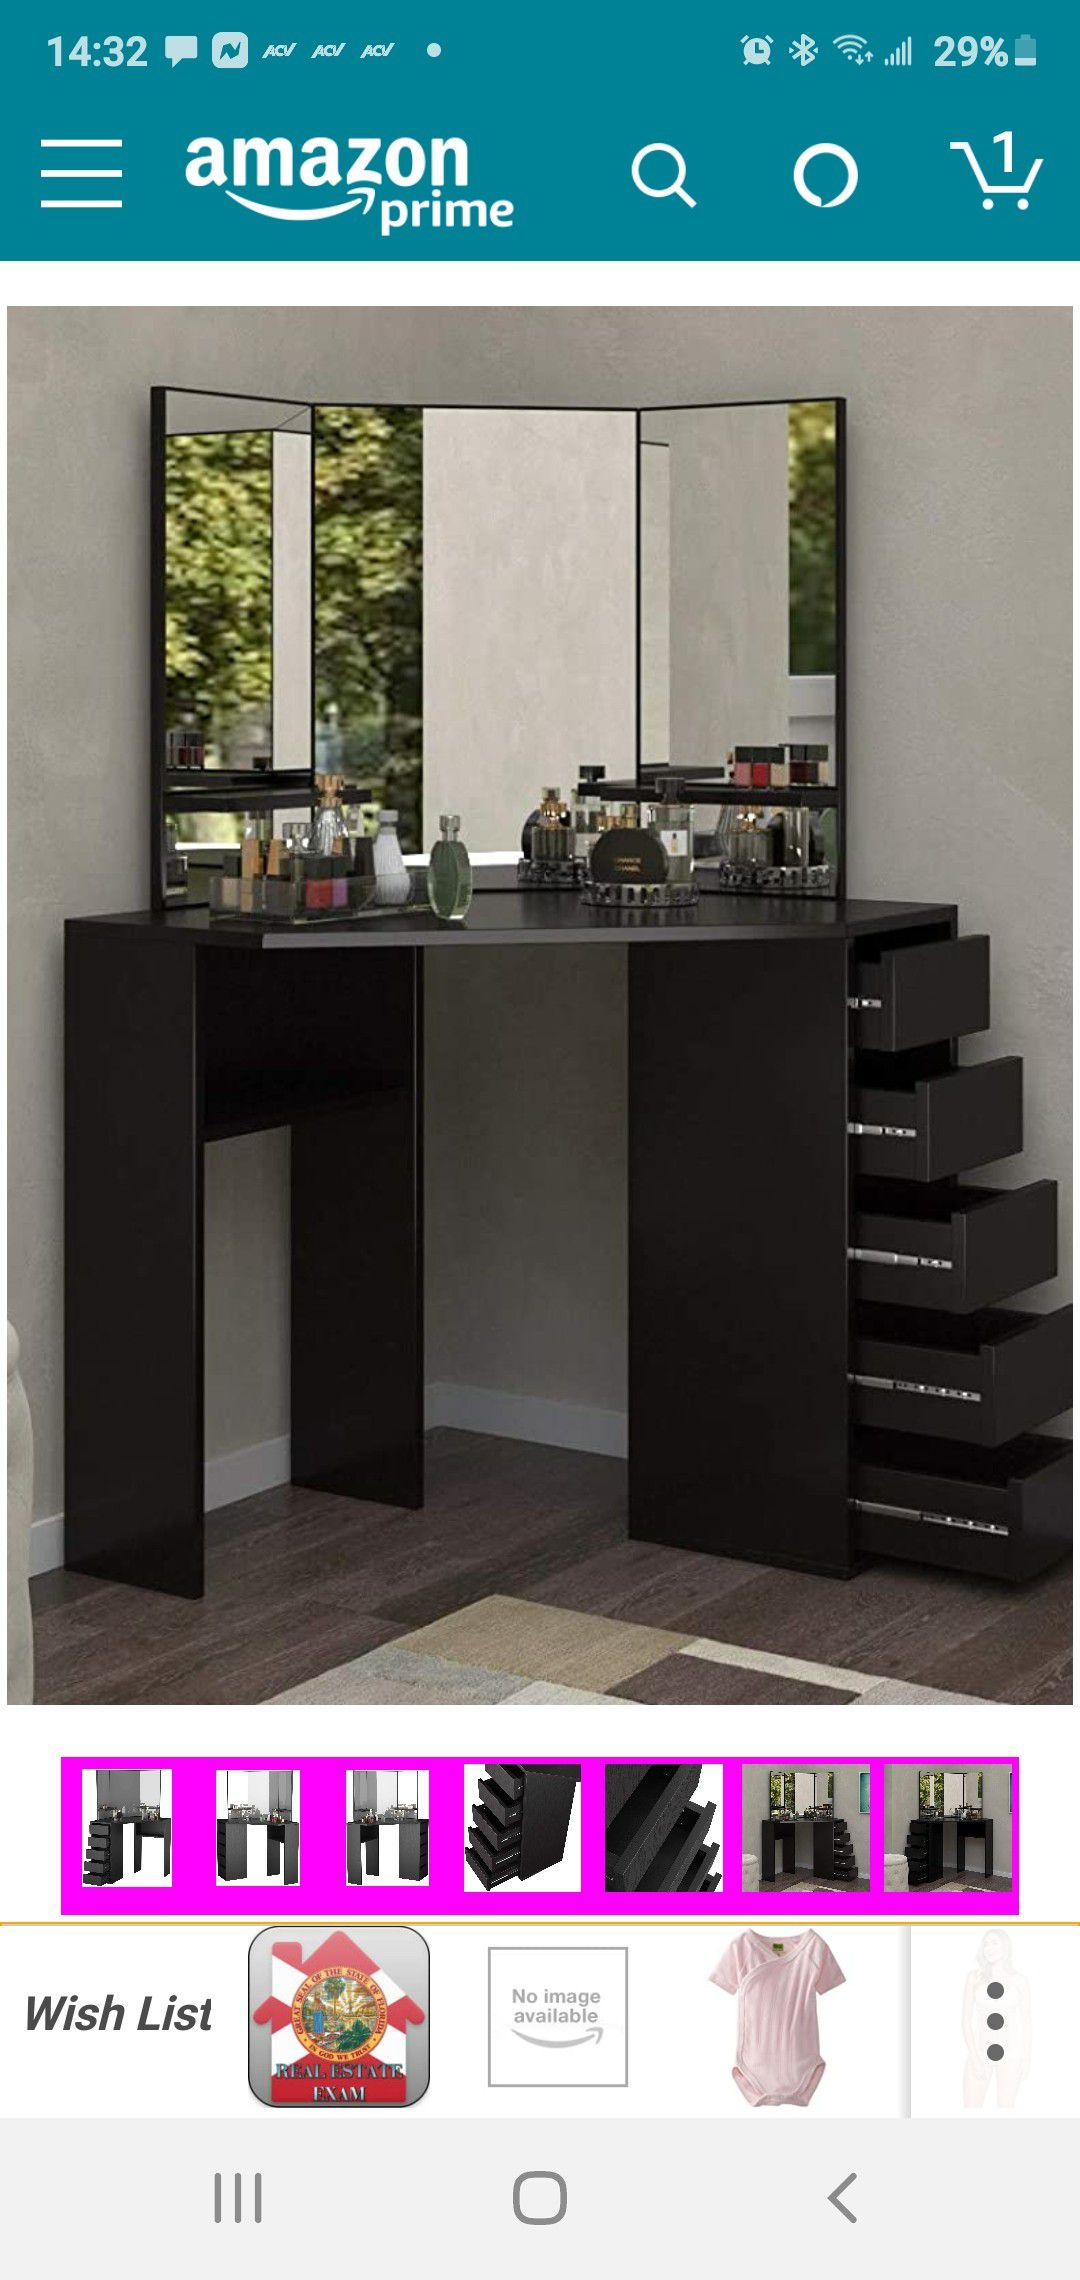 Makeup make up vanity table with mirror Luxury Contemporary design furniture made in Europe Reversible not China like others listing here